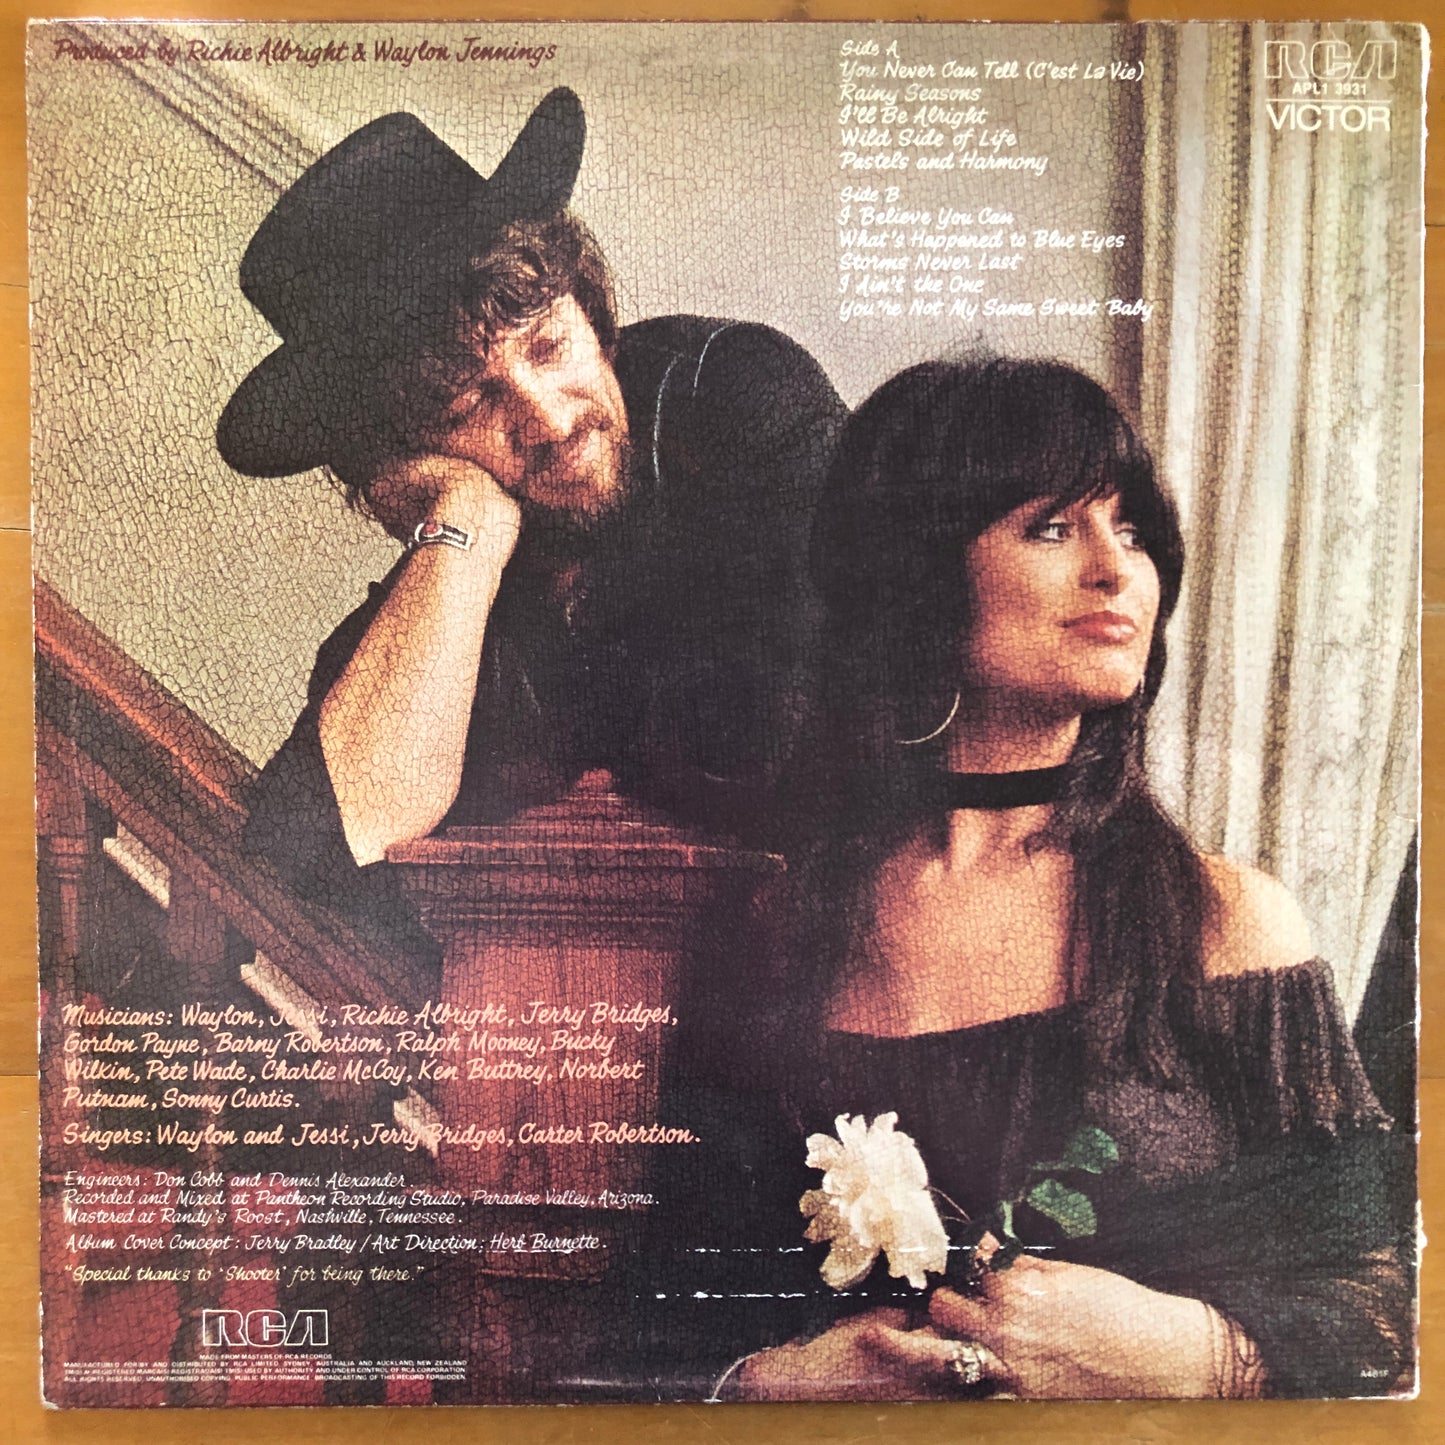 Waylon and Jessi - Leather and Lace